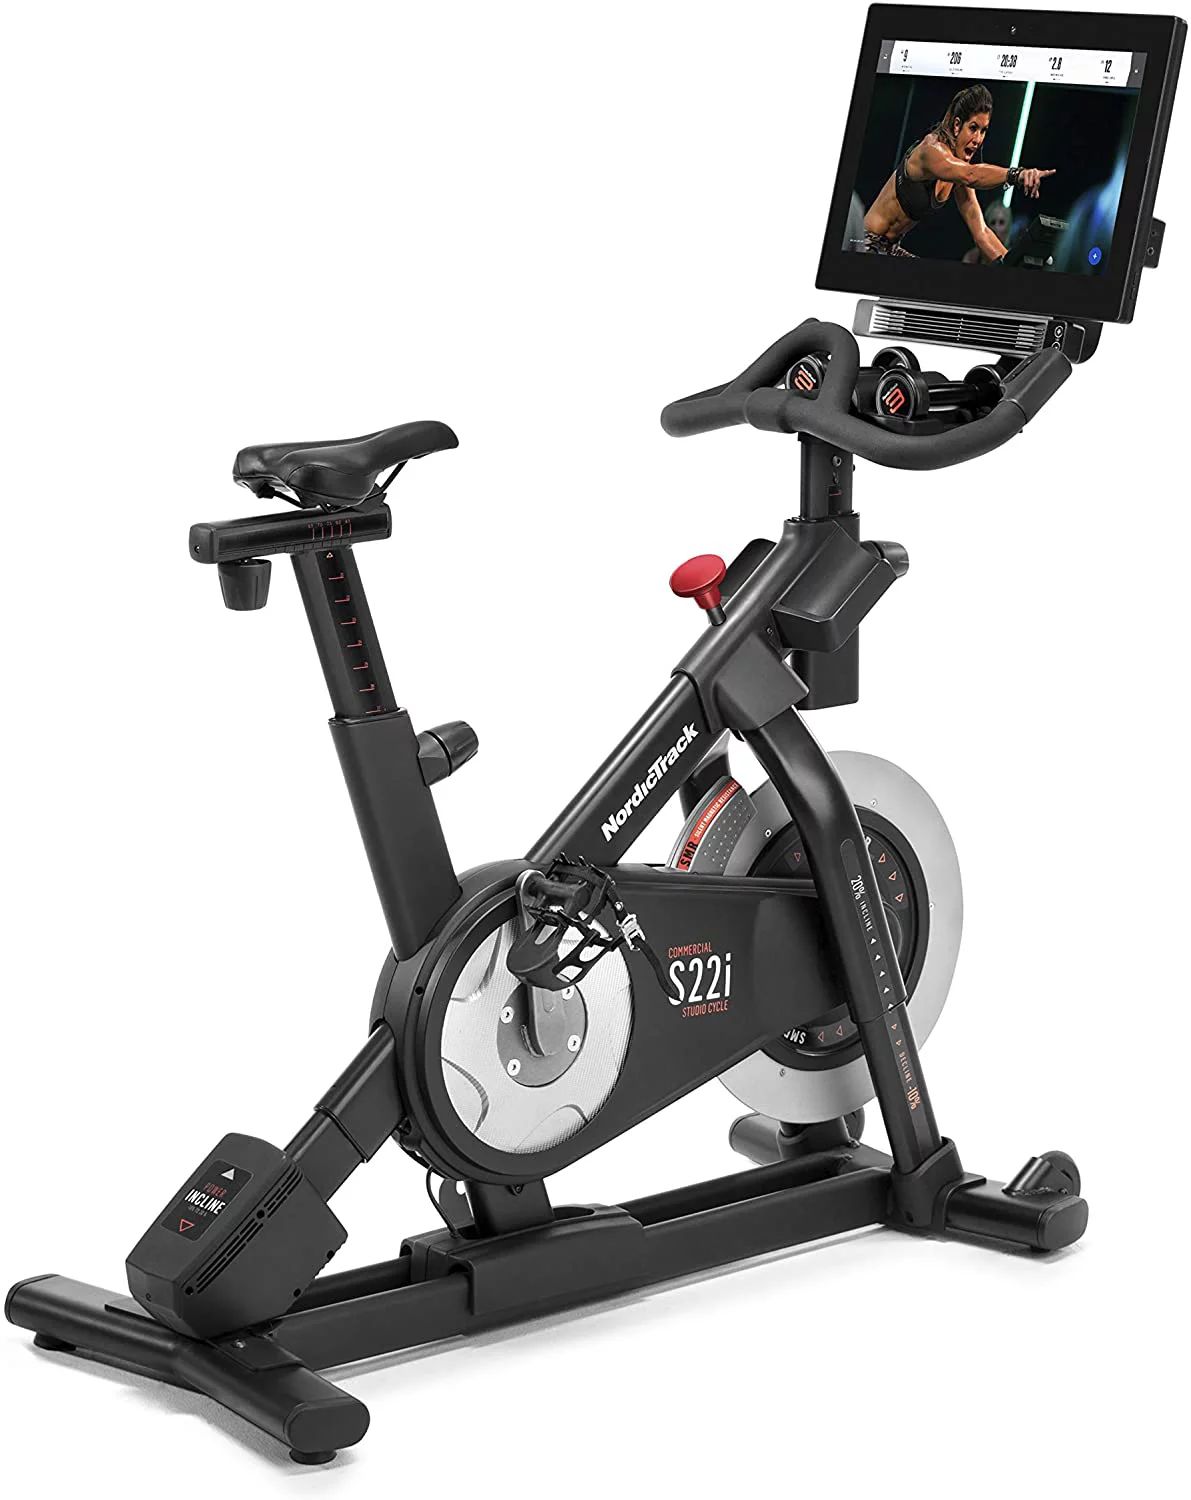 Nordic track Commercial S22i Studio Cycle , black 22 inch | Walmart (US)